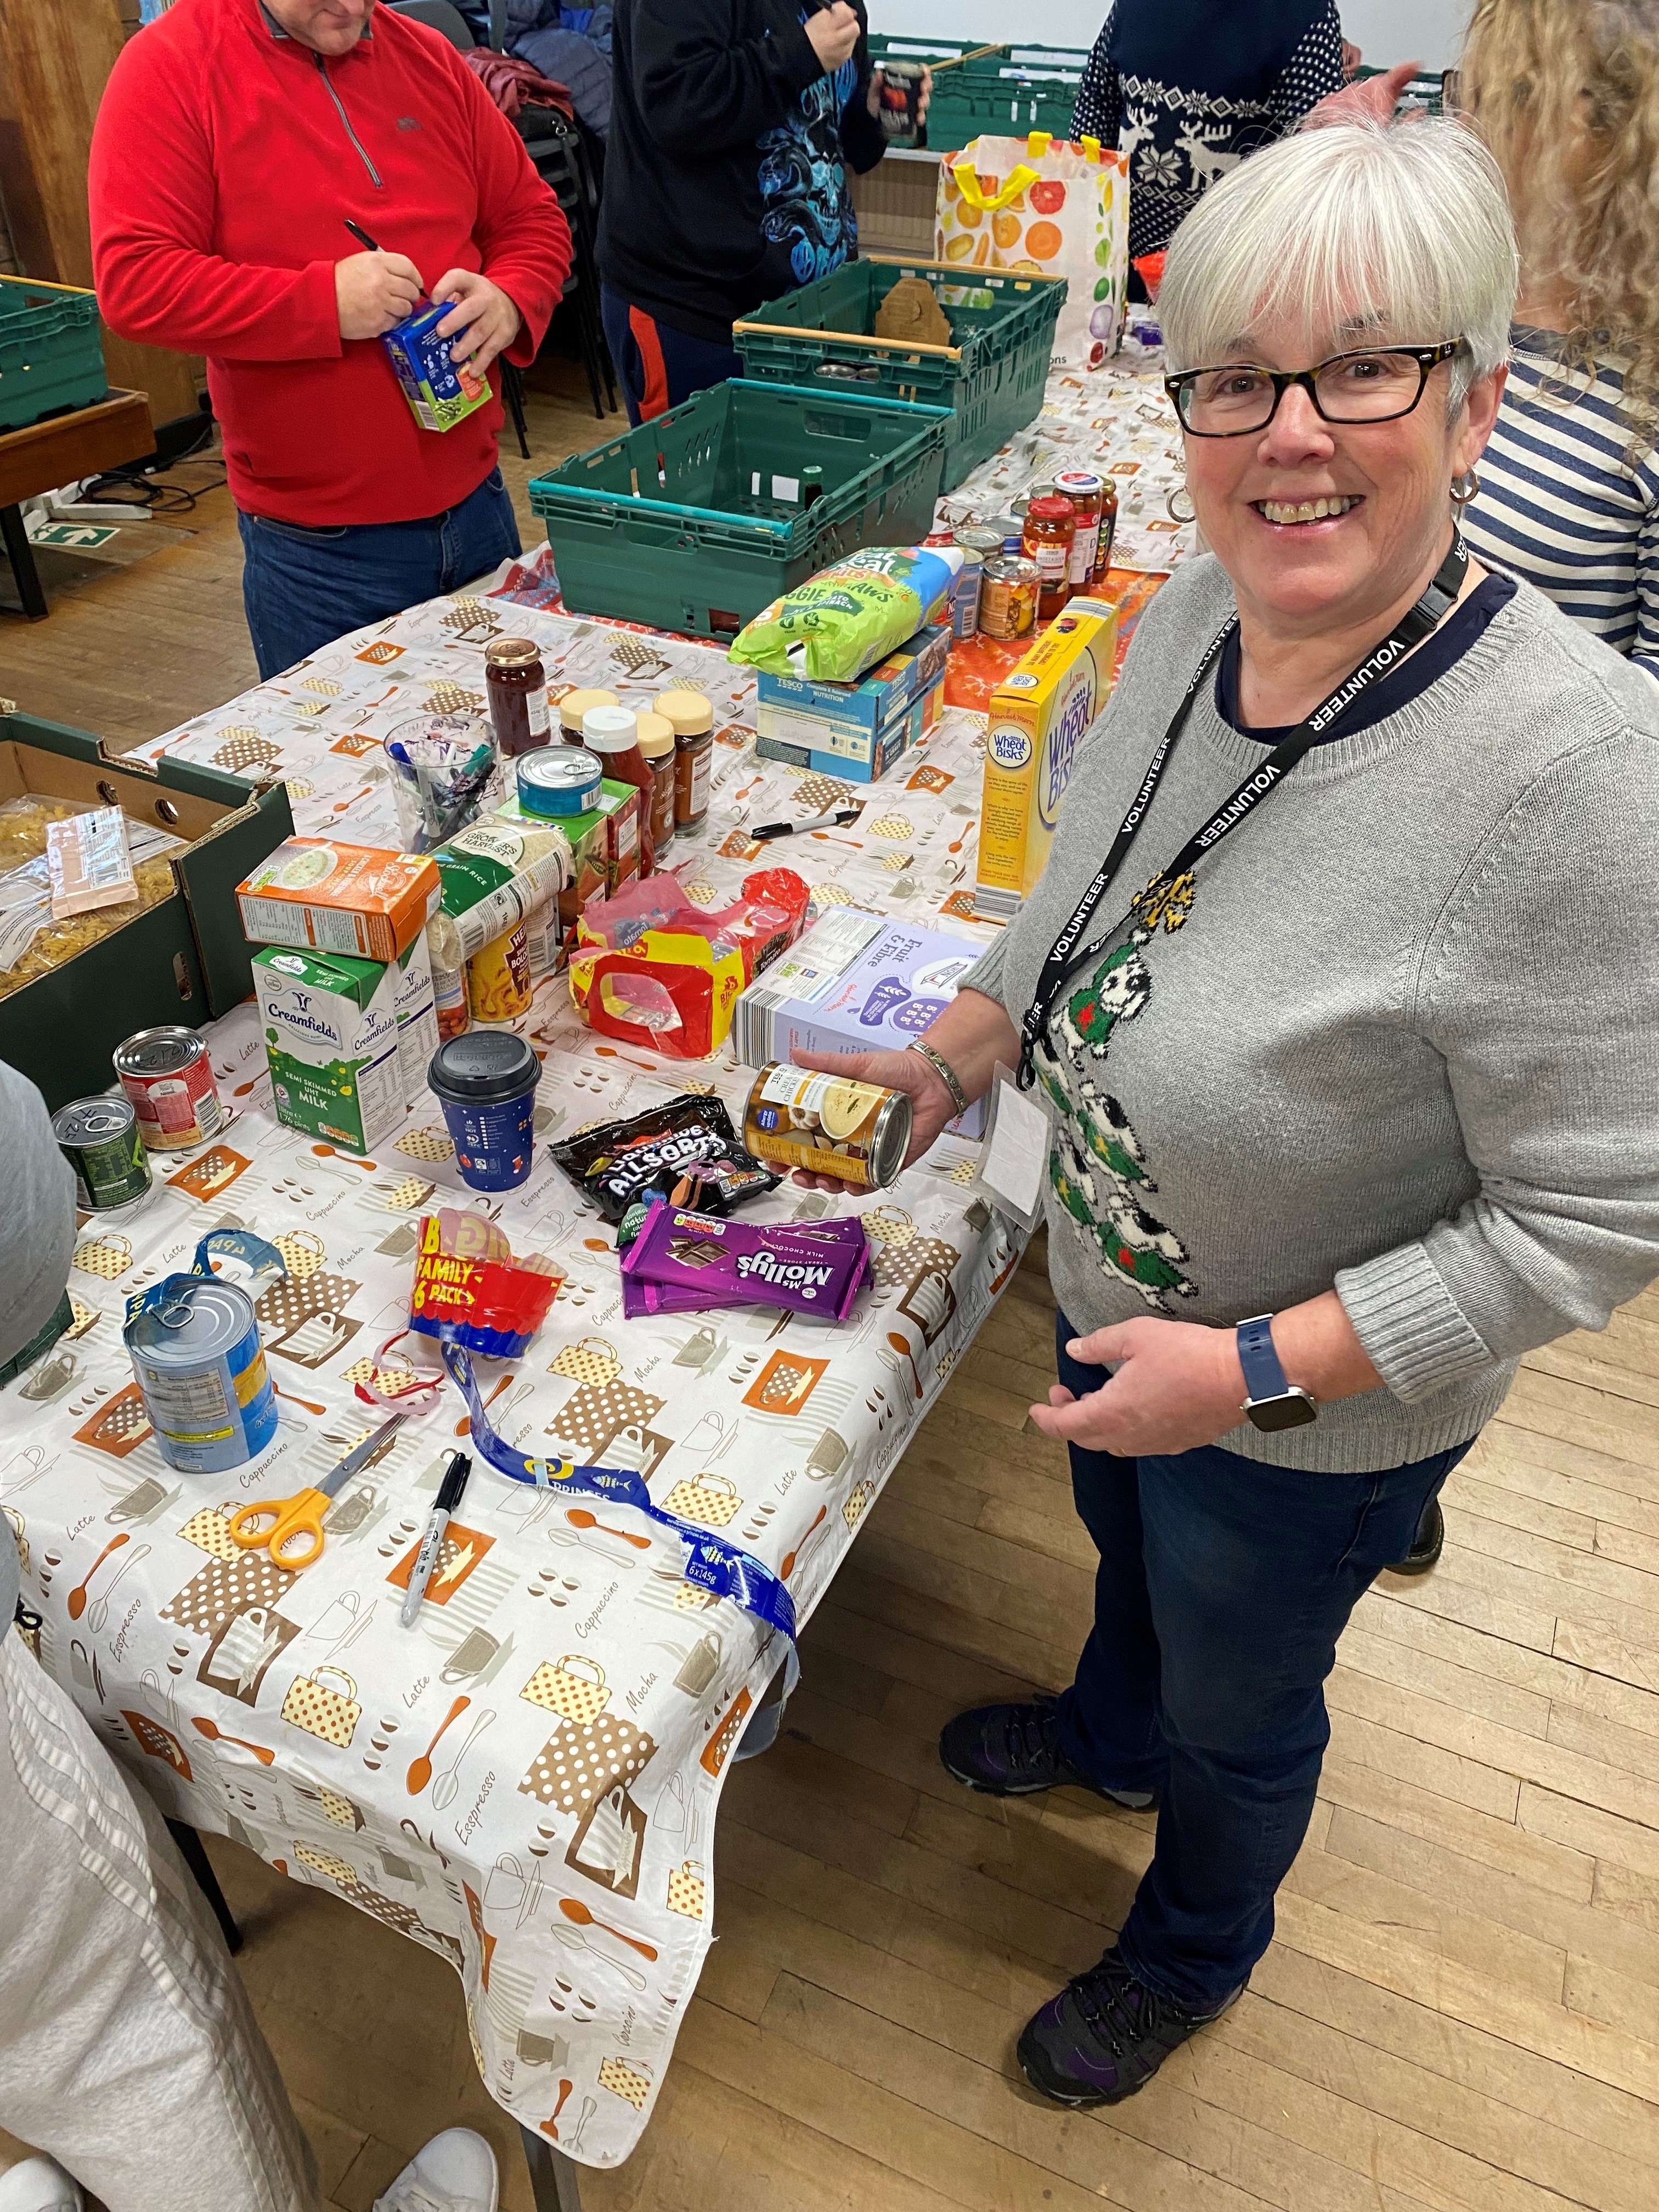 Delighted to make £3,000 donation to local foodbanks